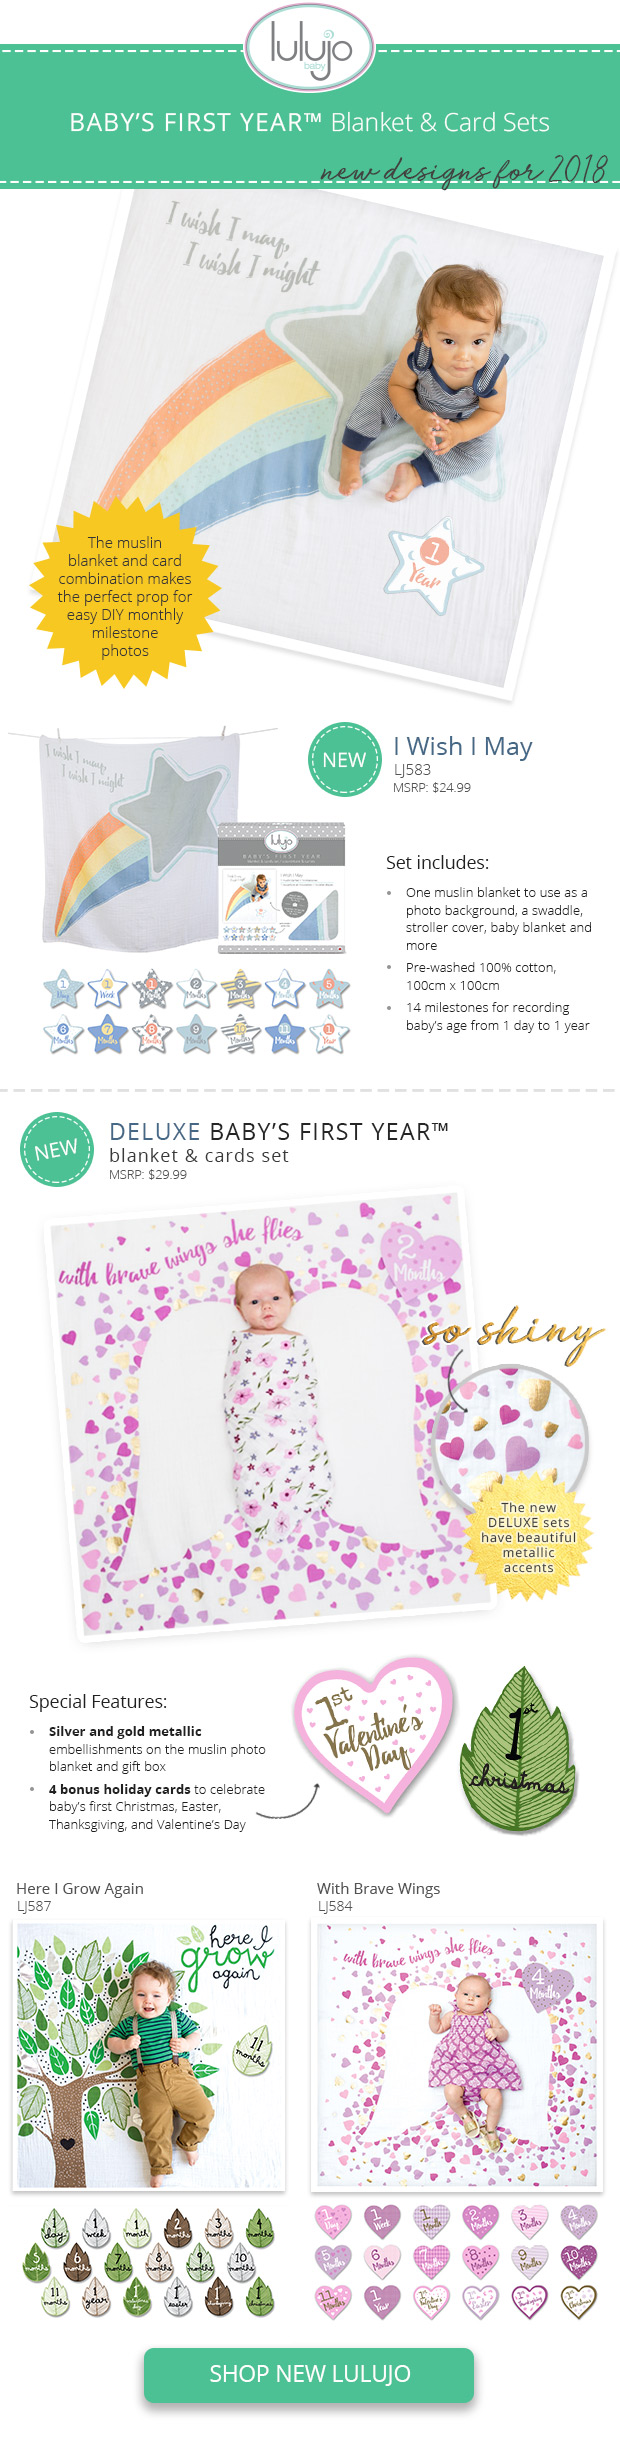 NEW Lulujo Baby's First Year blanket and card sets for 2018